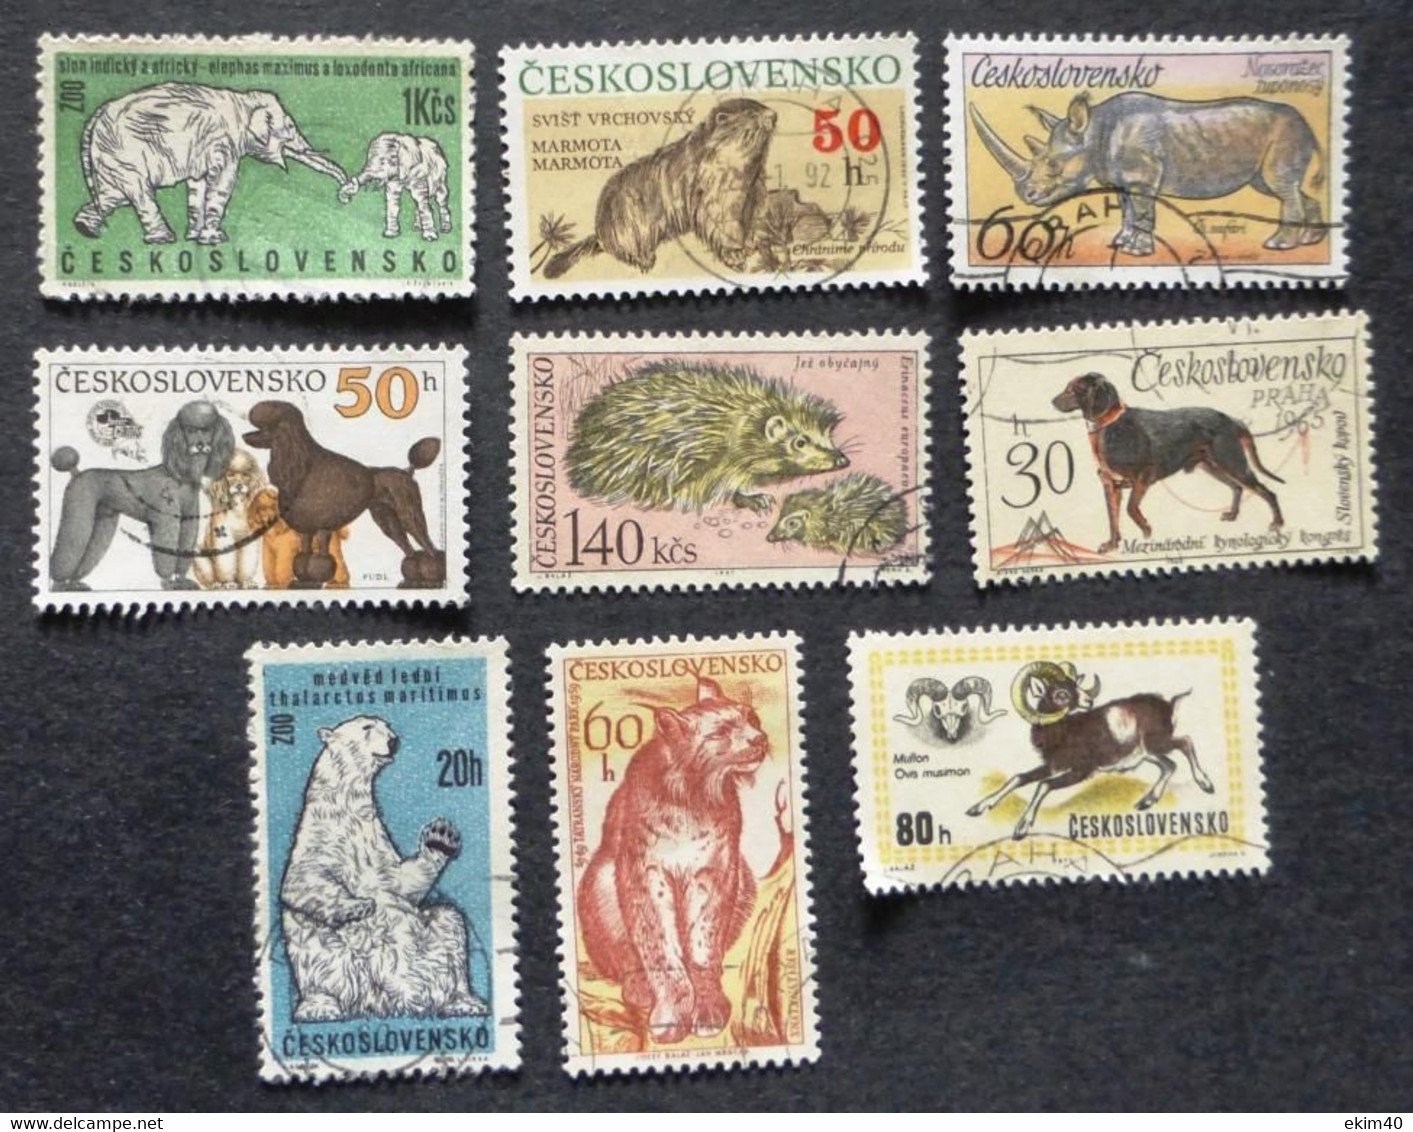 Selection Of Used/Cancelled Stamps From Czechoslovakia Wild & Domestic Animals. No DC-453 - Gebruikt